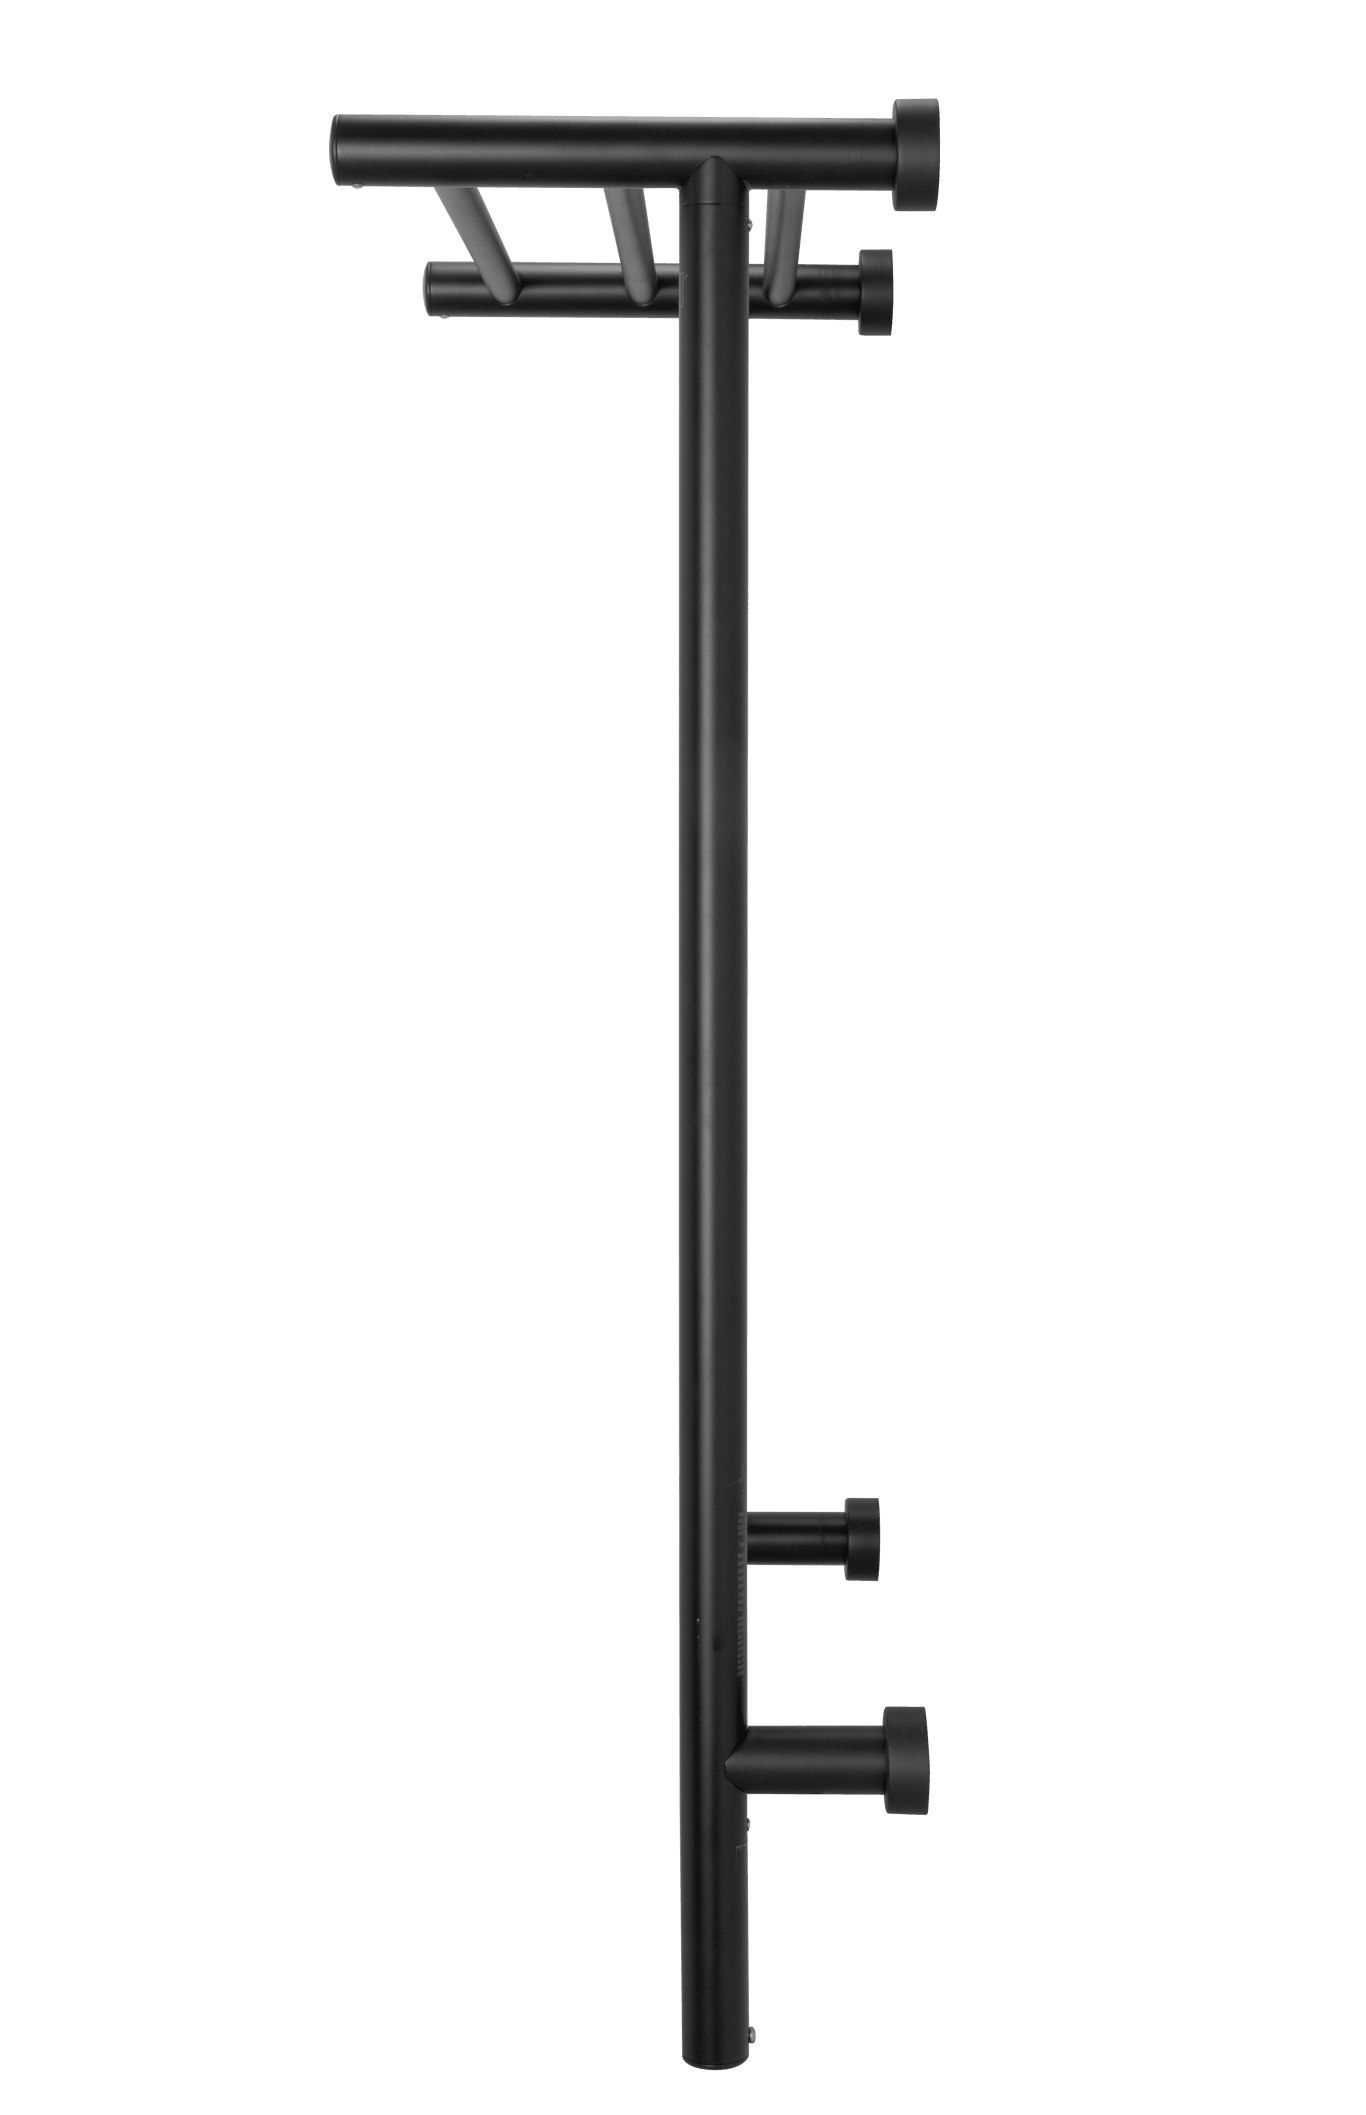 WarmlyYours Summit Dual Connect (Hardwired and Plug in) Towel Warmer - 19"w x 35.5"h